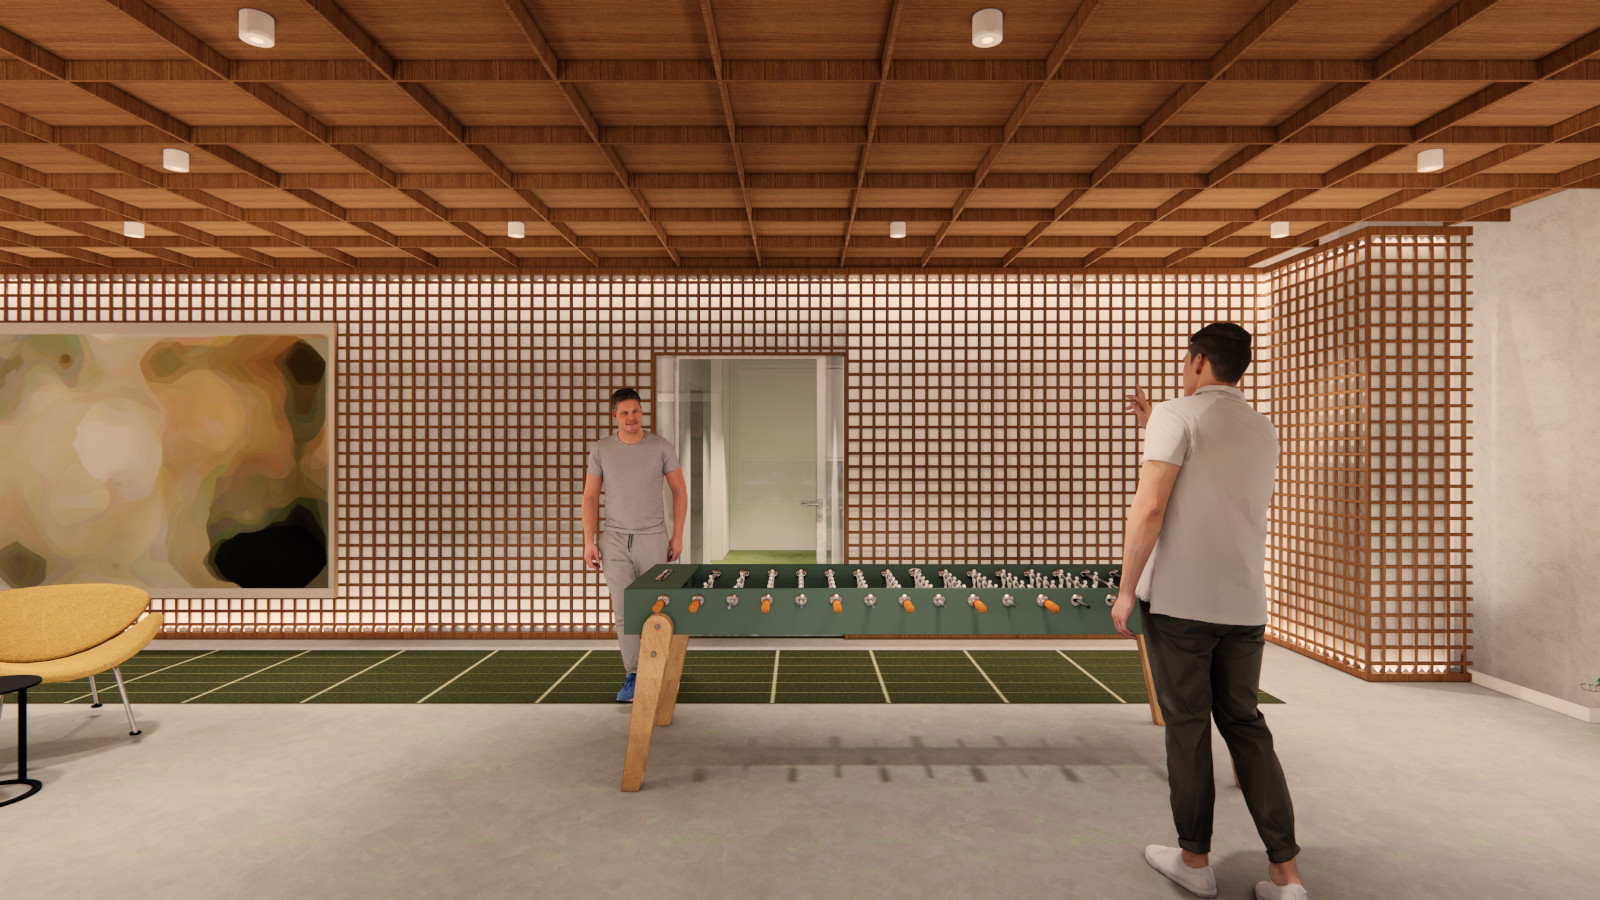 Architecture Concept: Foosball Table